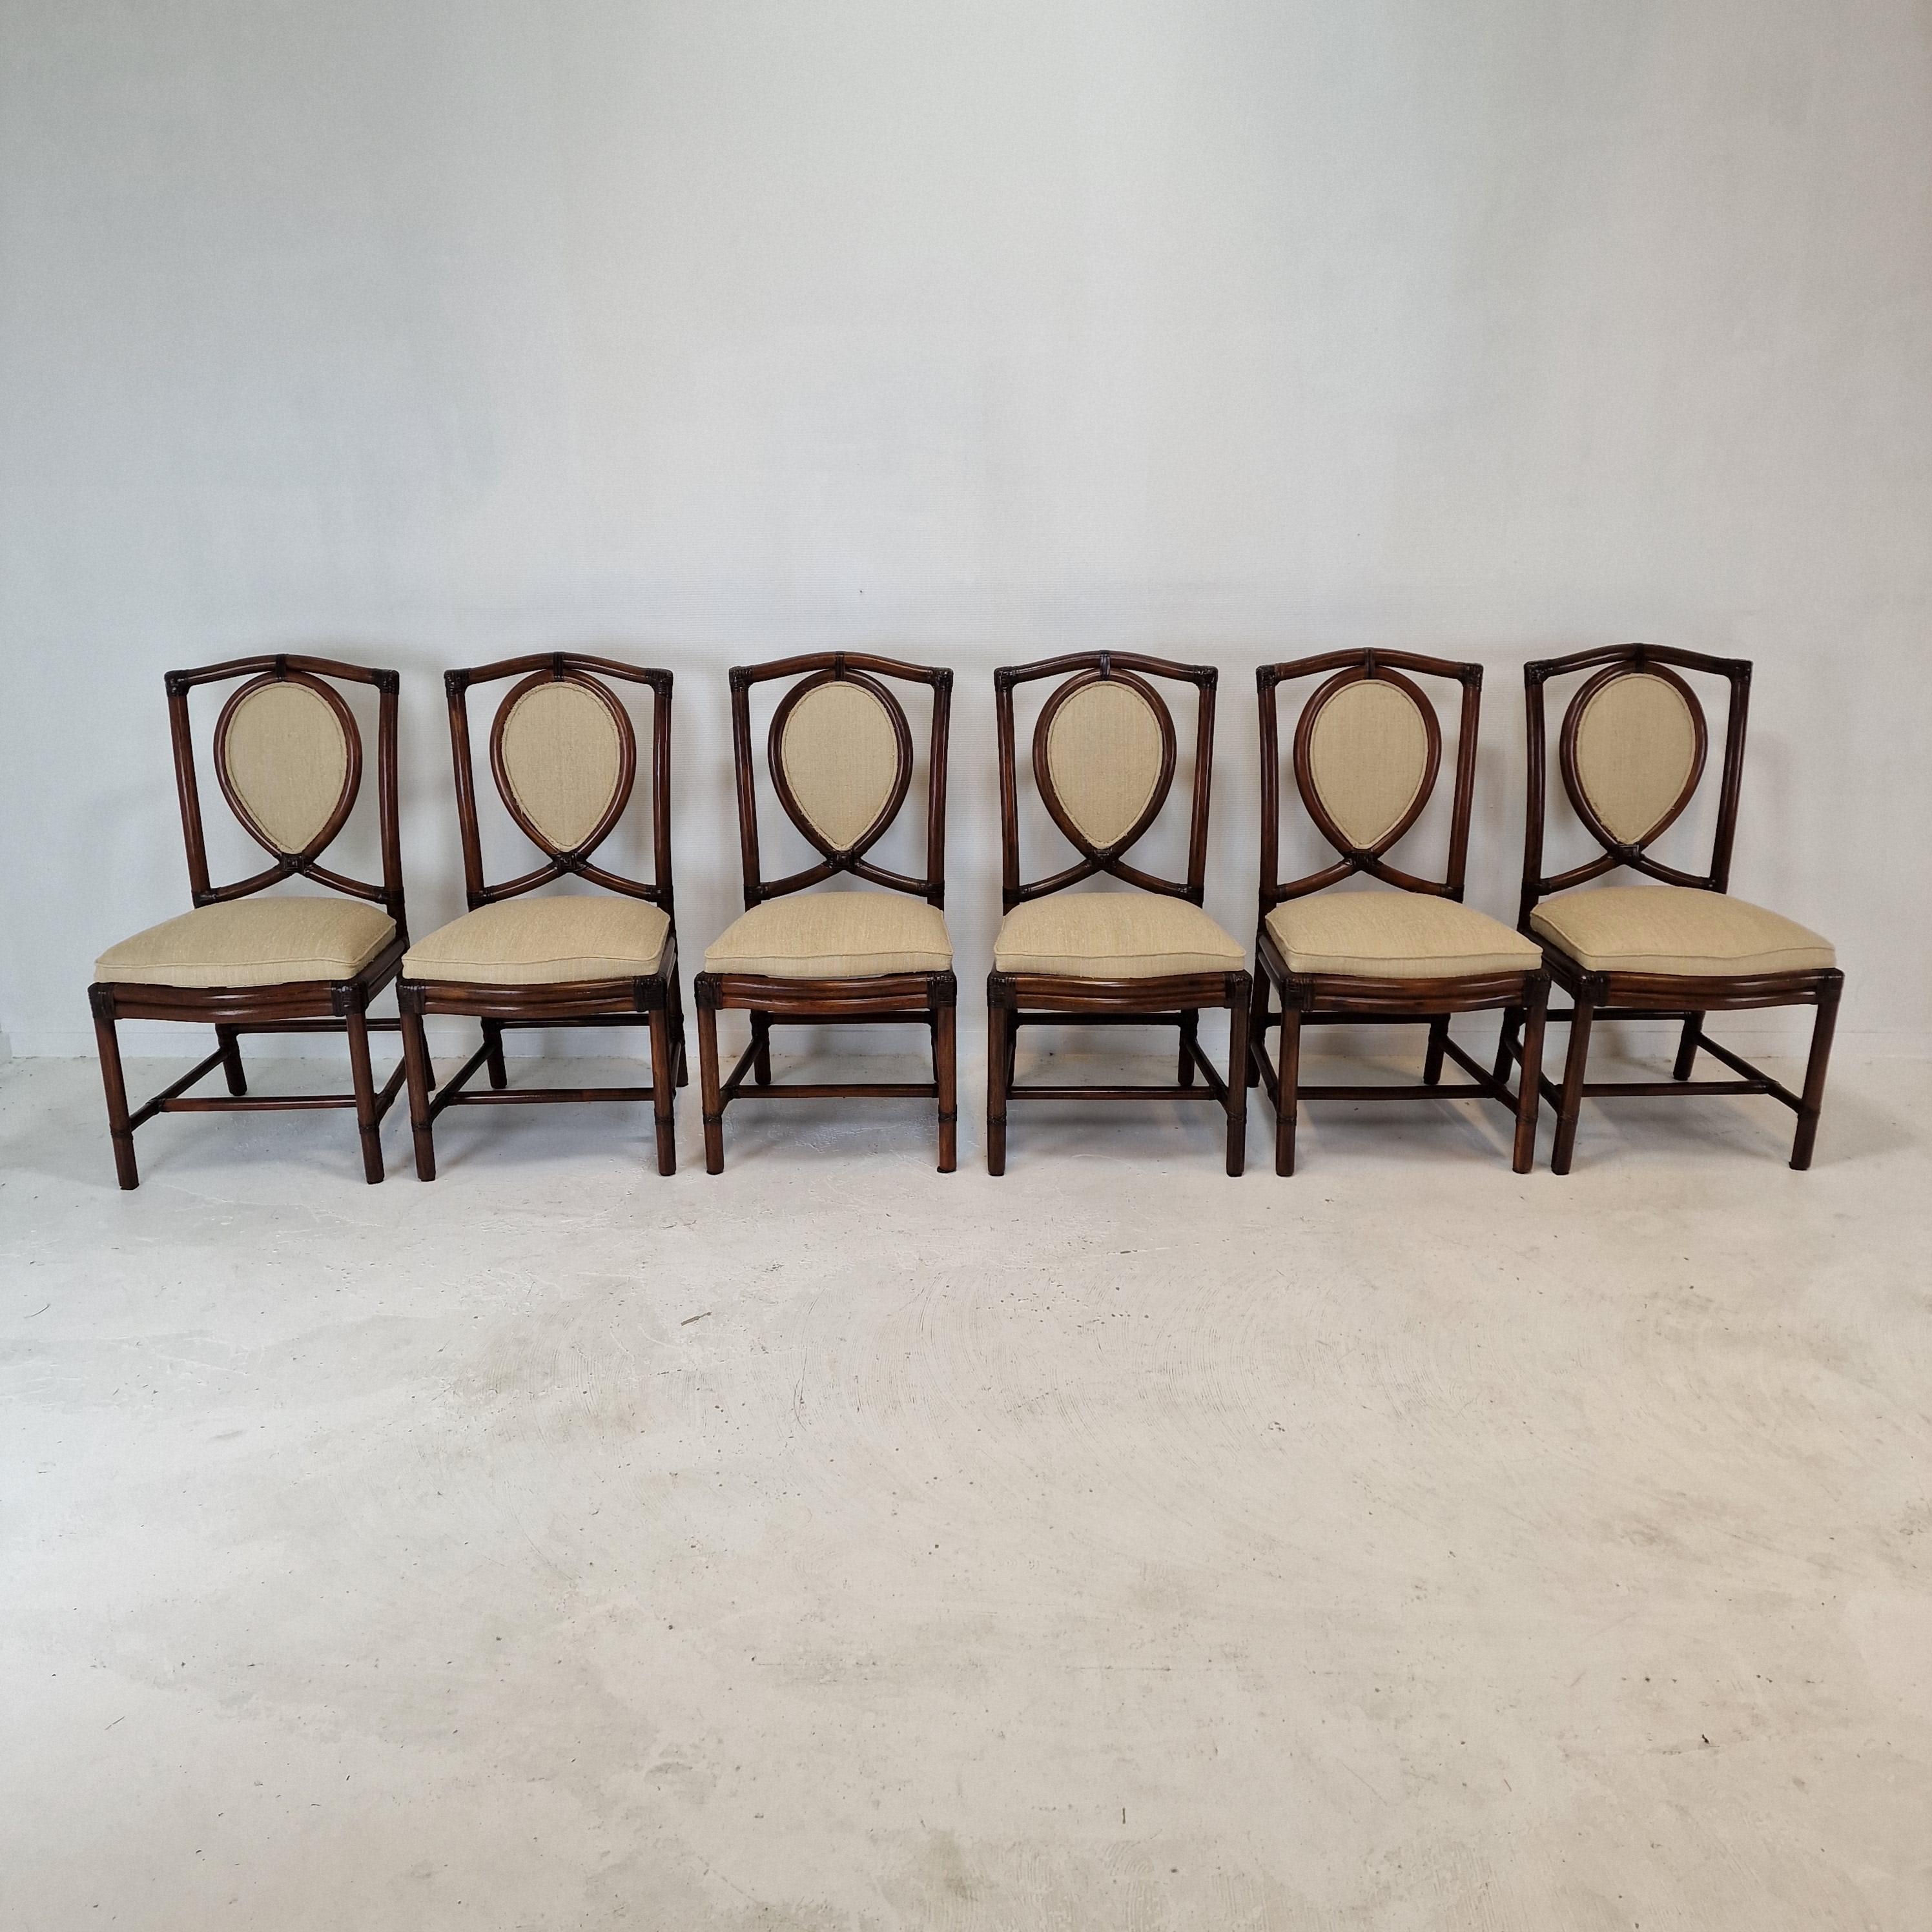 Very nice set of 6 Italian dining chairs, fabricated in the 1970s by Gasparucci Italo.

They are made of bamboo.
The chairs are in good vintage condition.

We work with professional packers and shippers, we can deliver worldwide in 5 to 10 days.